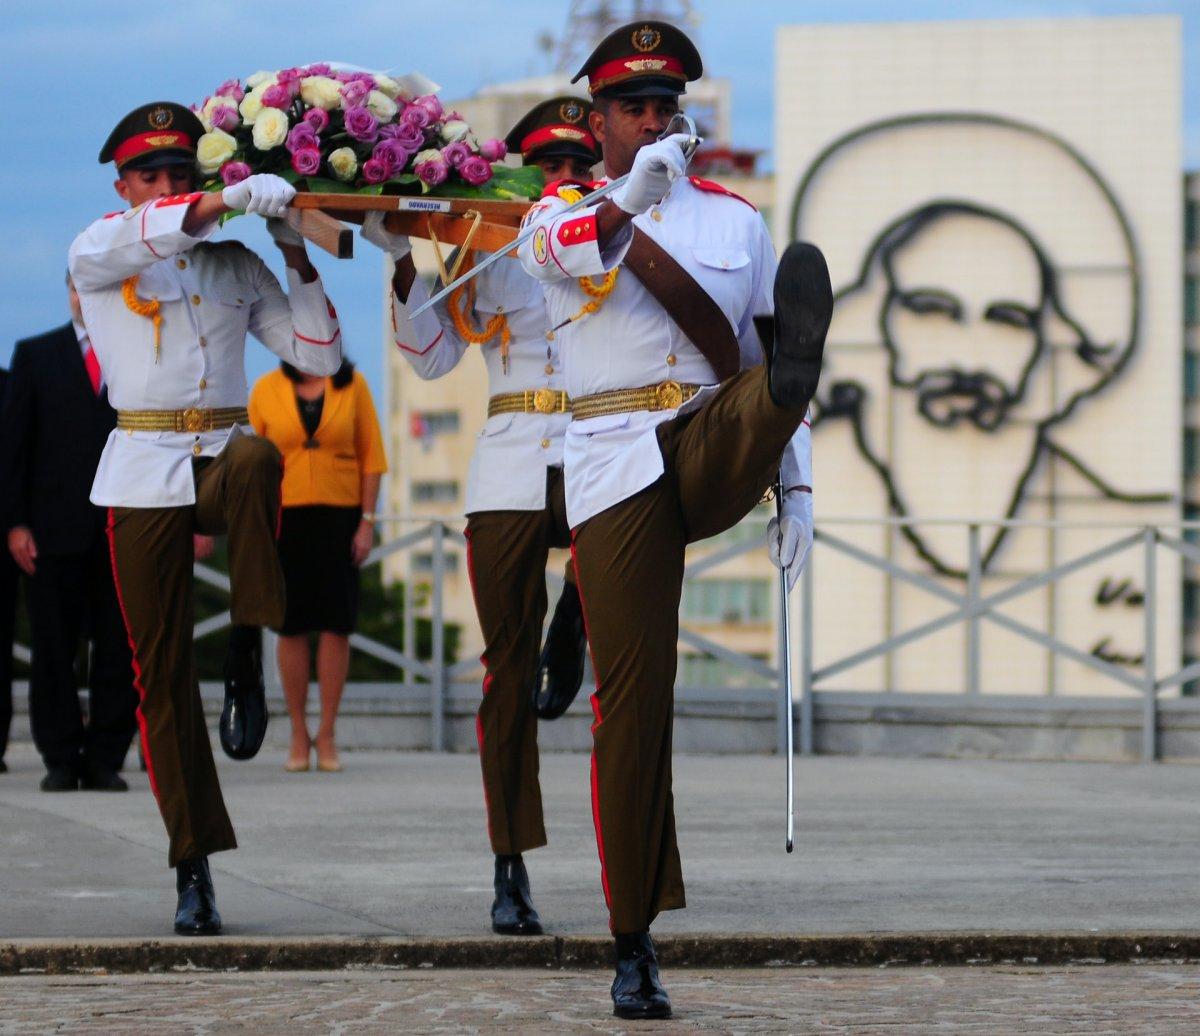 21 - facts about military service and education in cuba